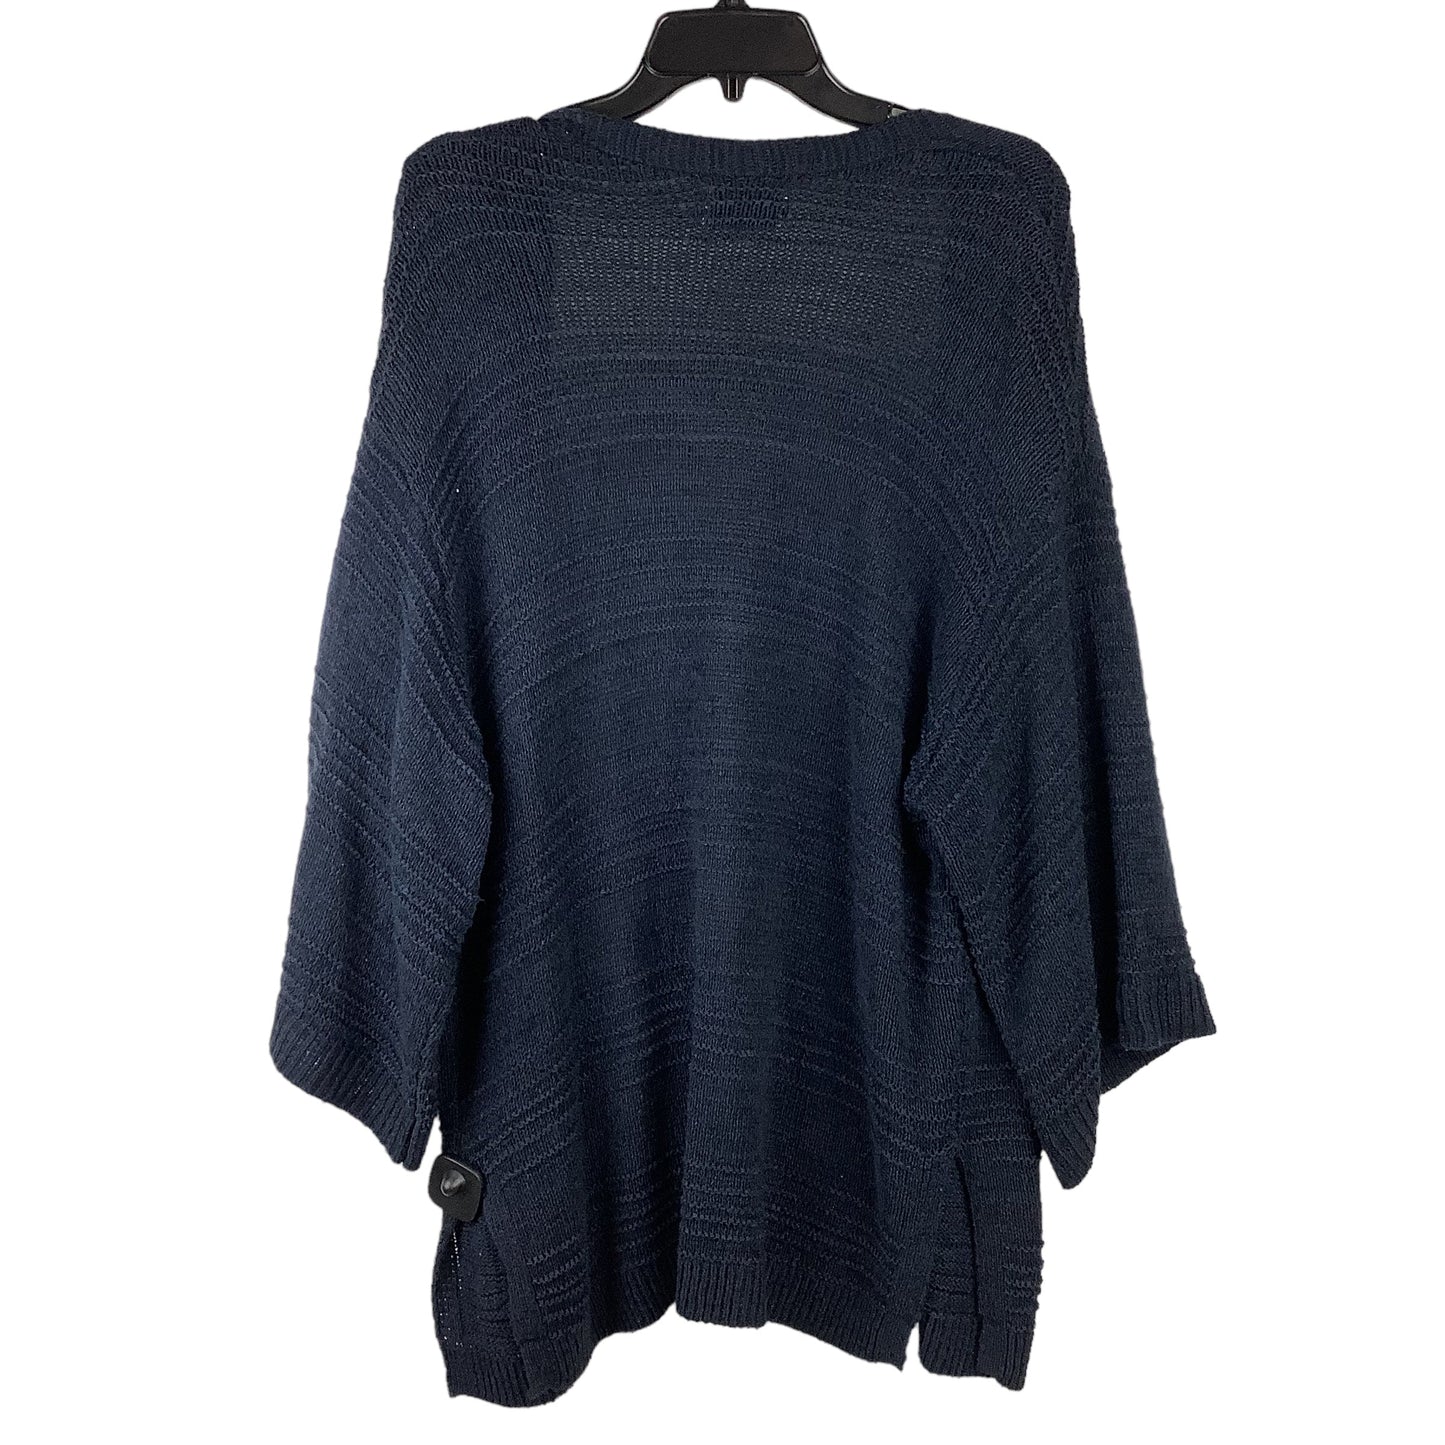 Cardigan By Old Navy  Size: M